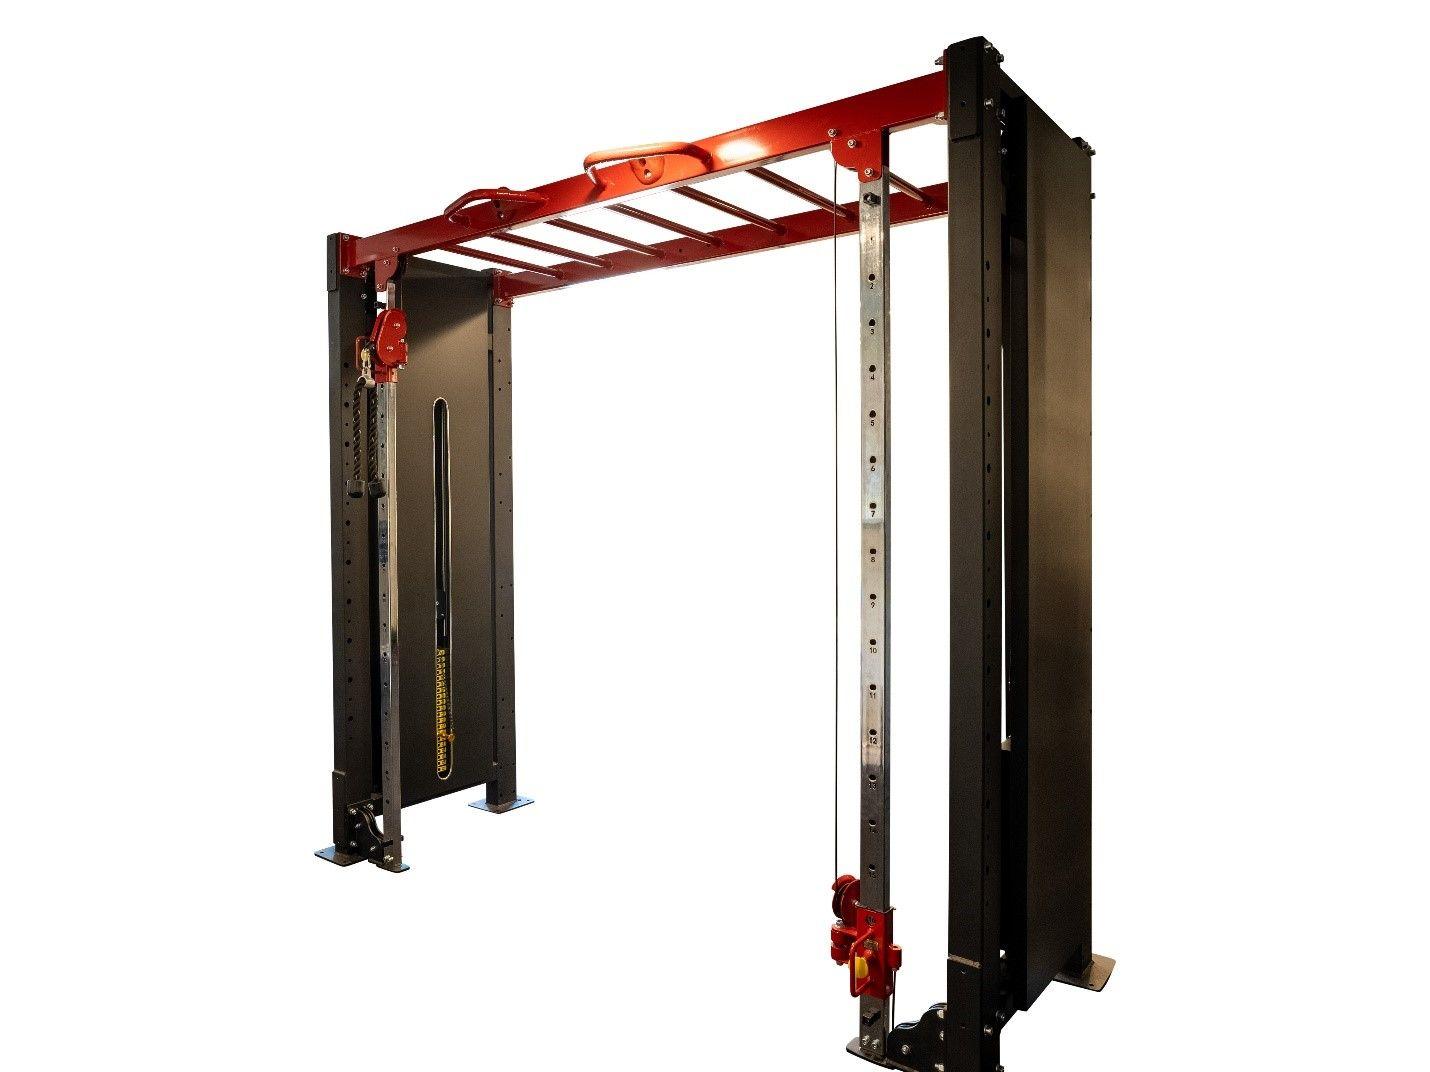 Extended overhanging pull-up bar